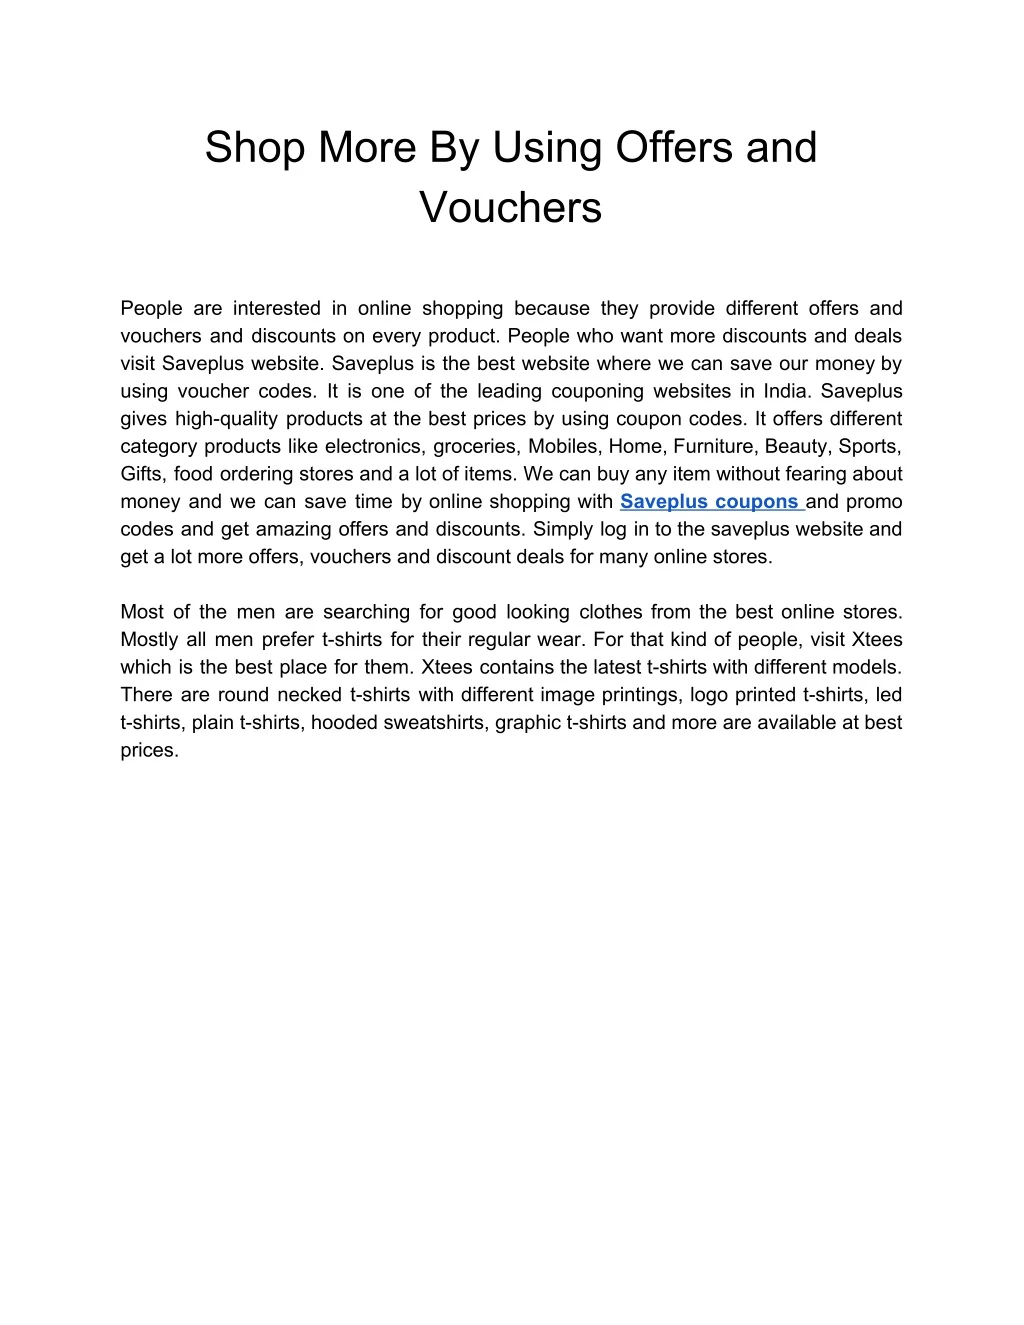 shop more by using offers and vouchers